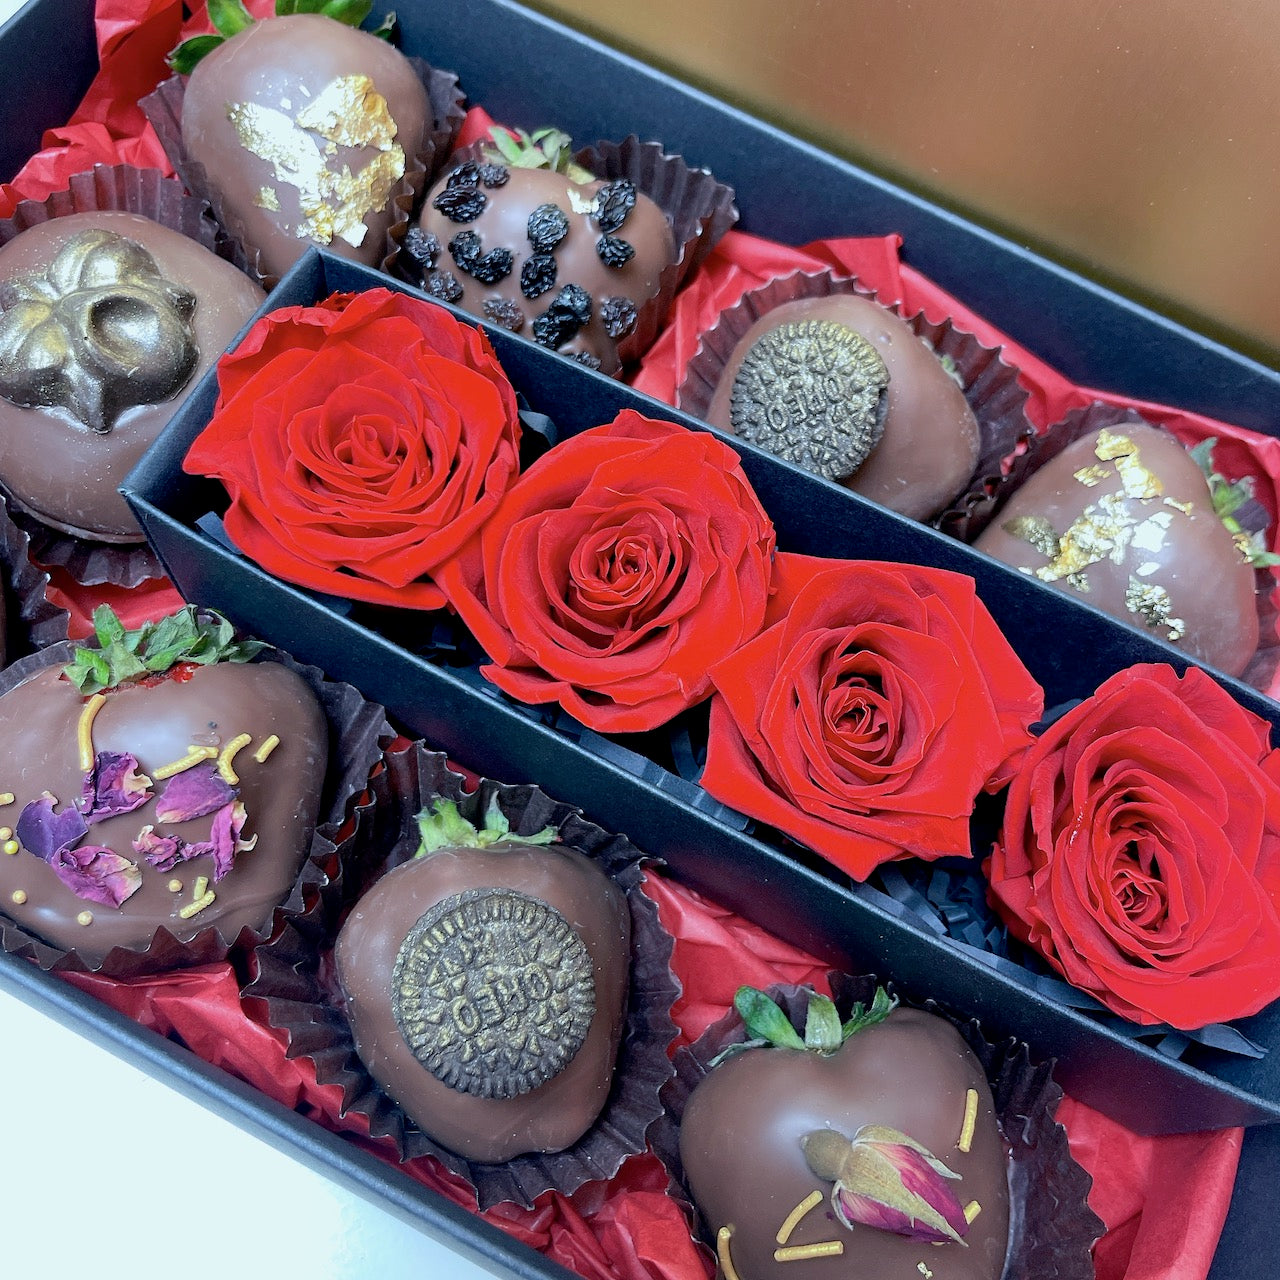 Chocolate Strawberries and Preserved Roses delivery box, same day delivery, Boxed Etenal Roses, Infinity Roses Box, Dessert Box delivery, chocolate strawberries roses, romantic gifts for her, romantic gifts for him, Valentine’s Day gifts for her, valentine’s day gifts for him